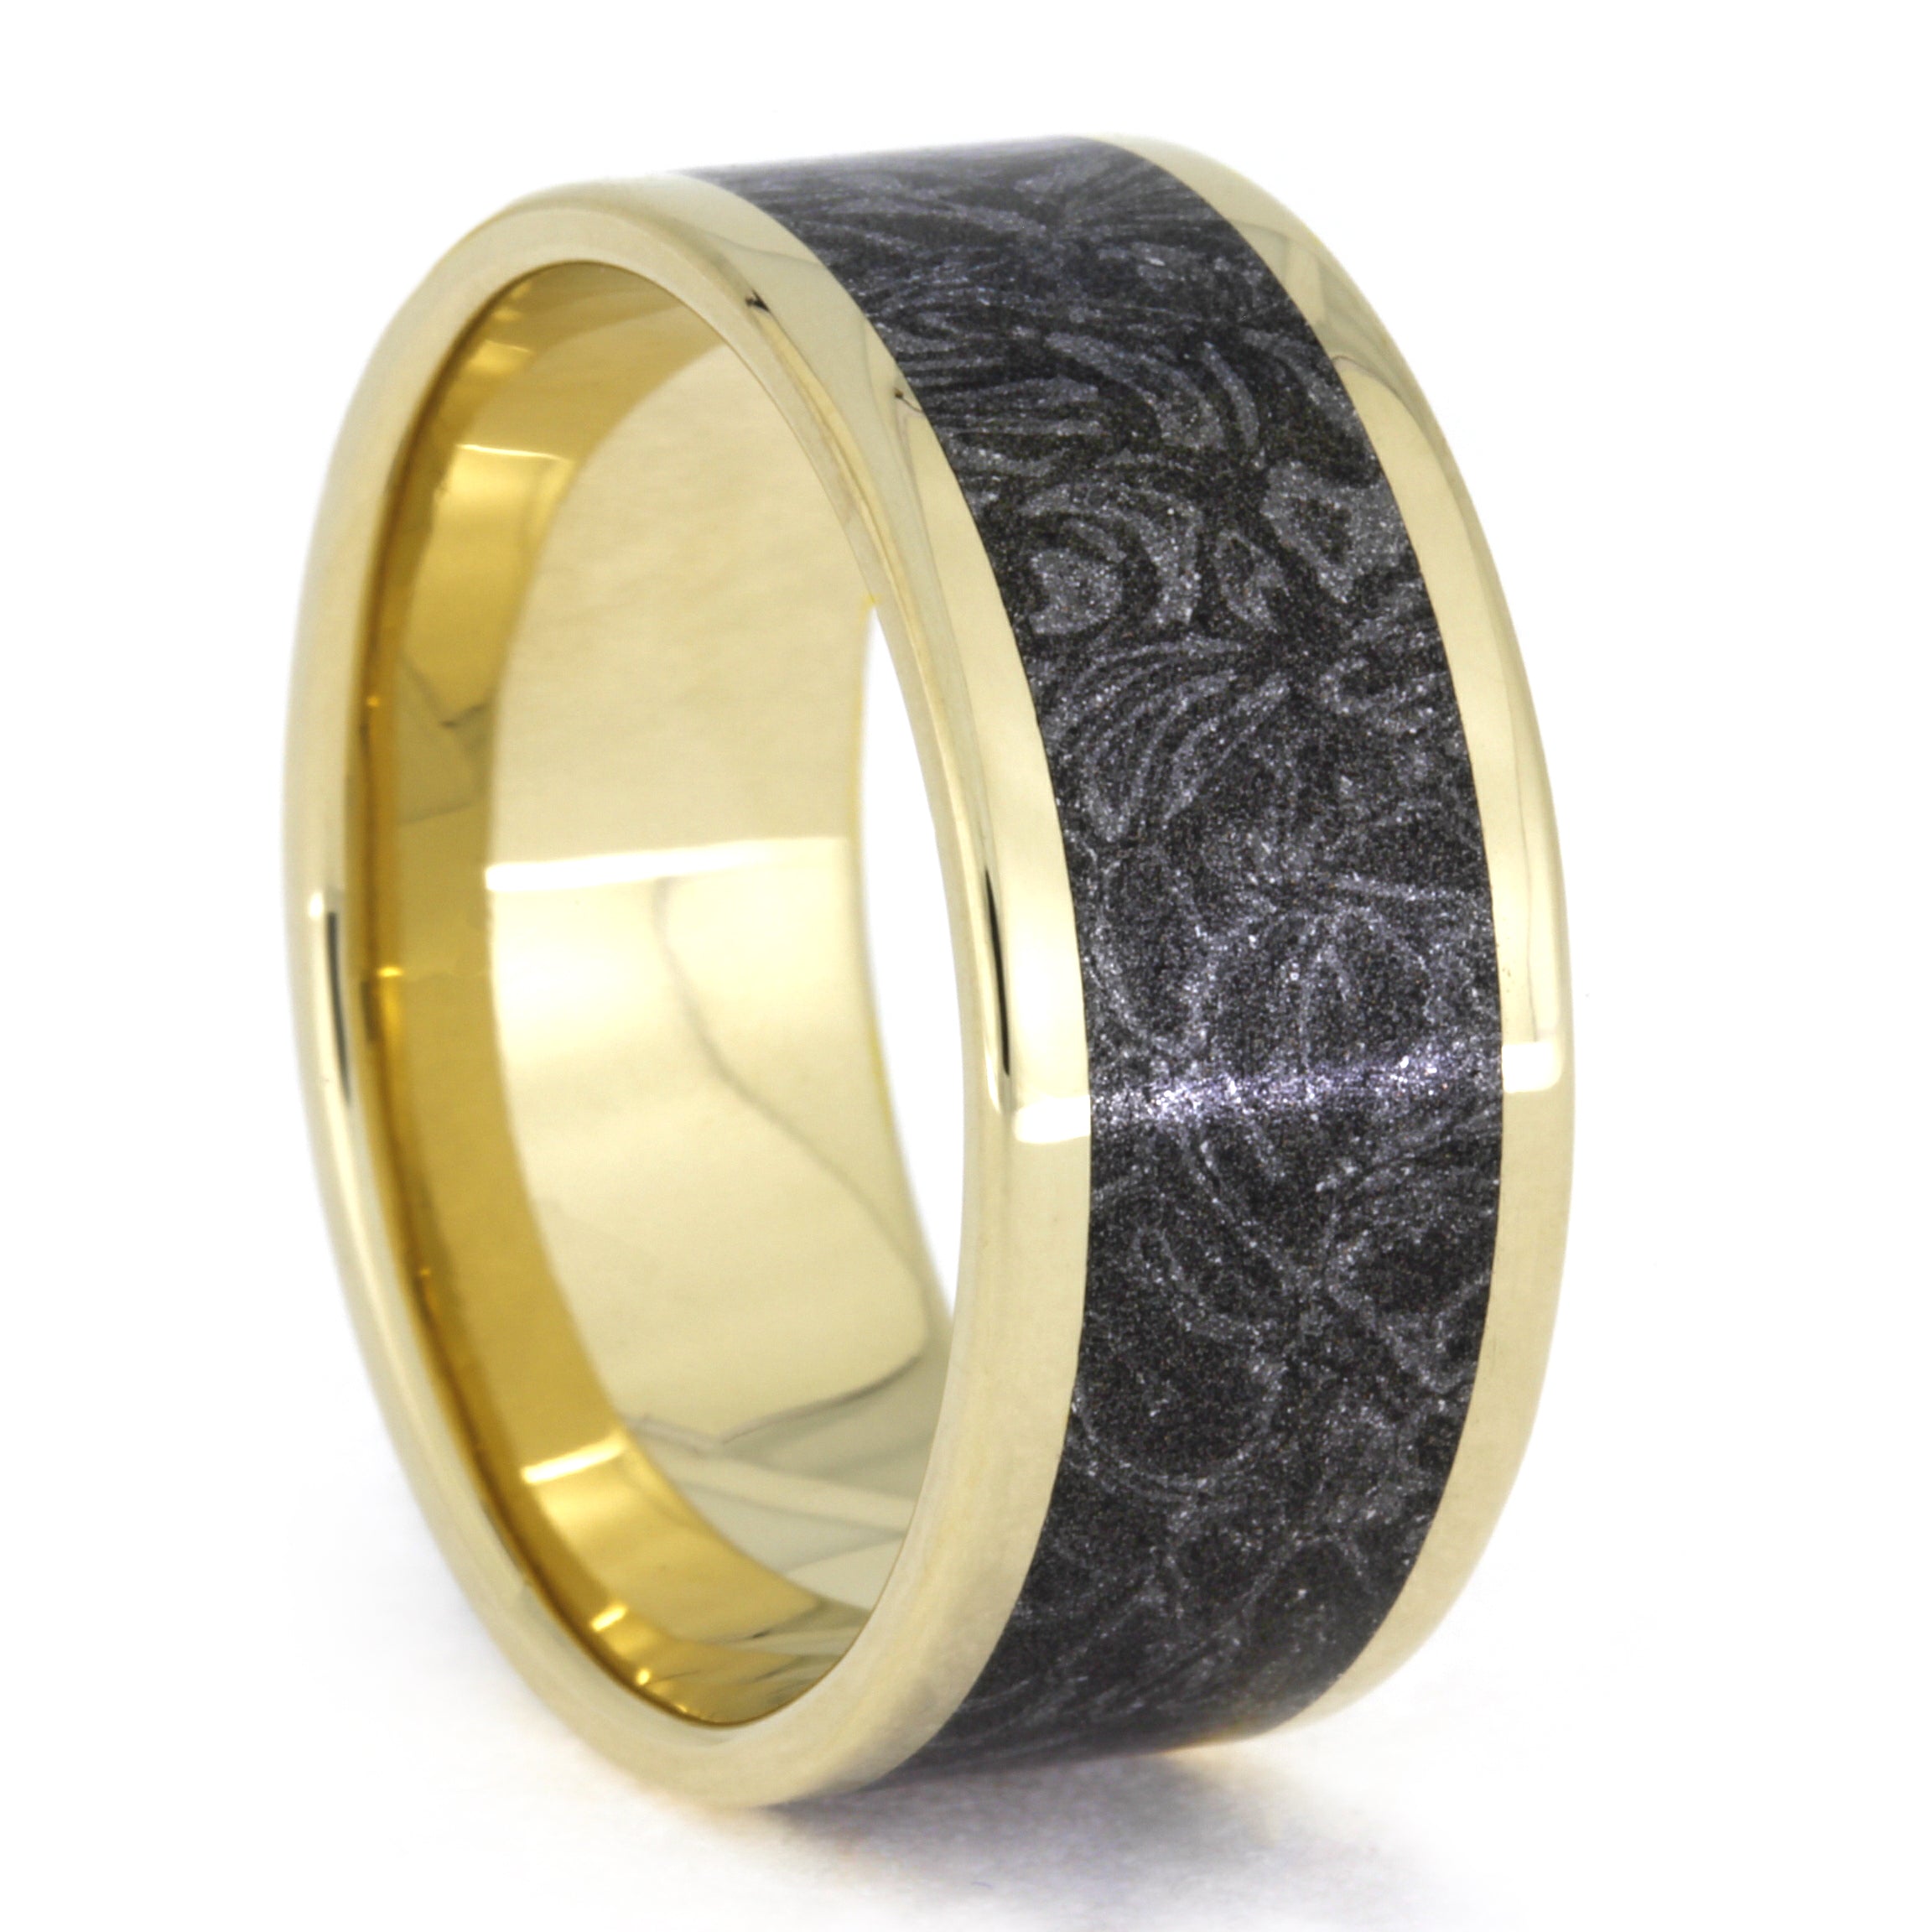 Black and White Mokume Gane Ring in Yellow Gold, Size 12.25-RS10317 - Jewelry by Johan